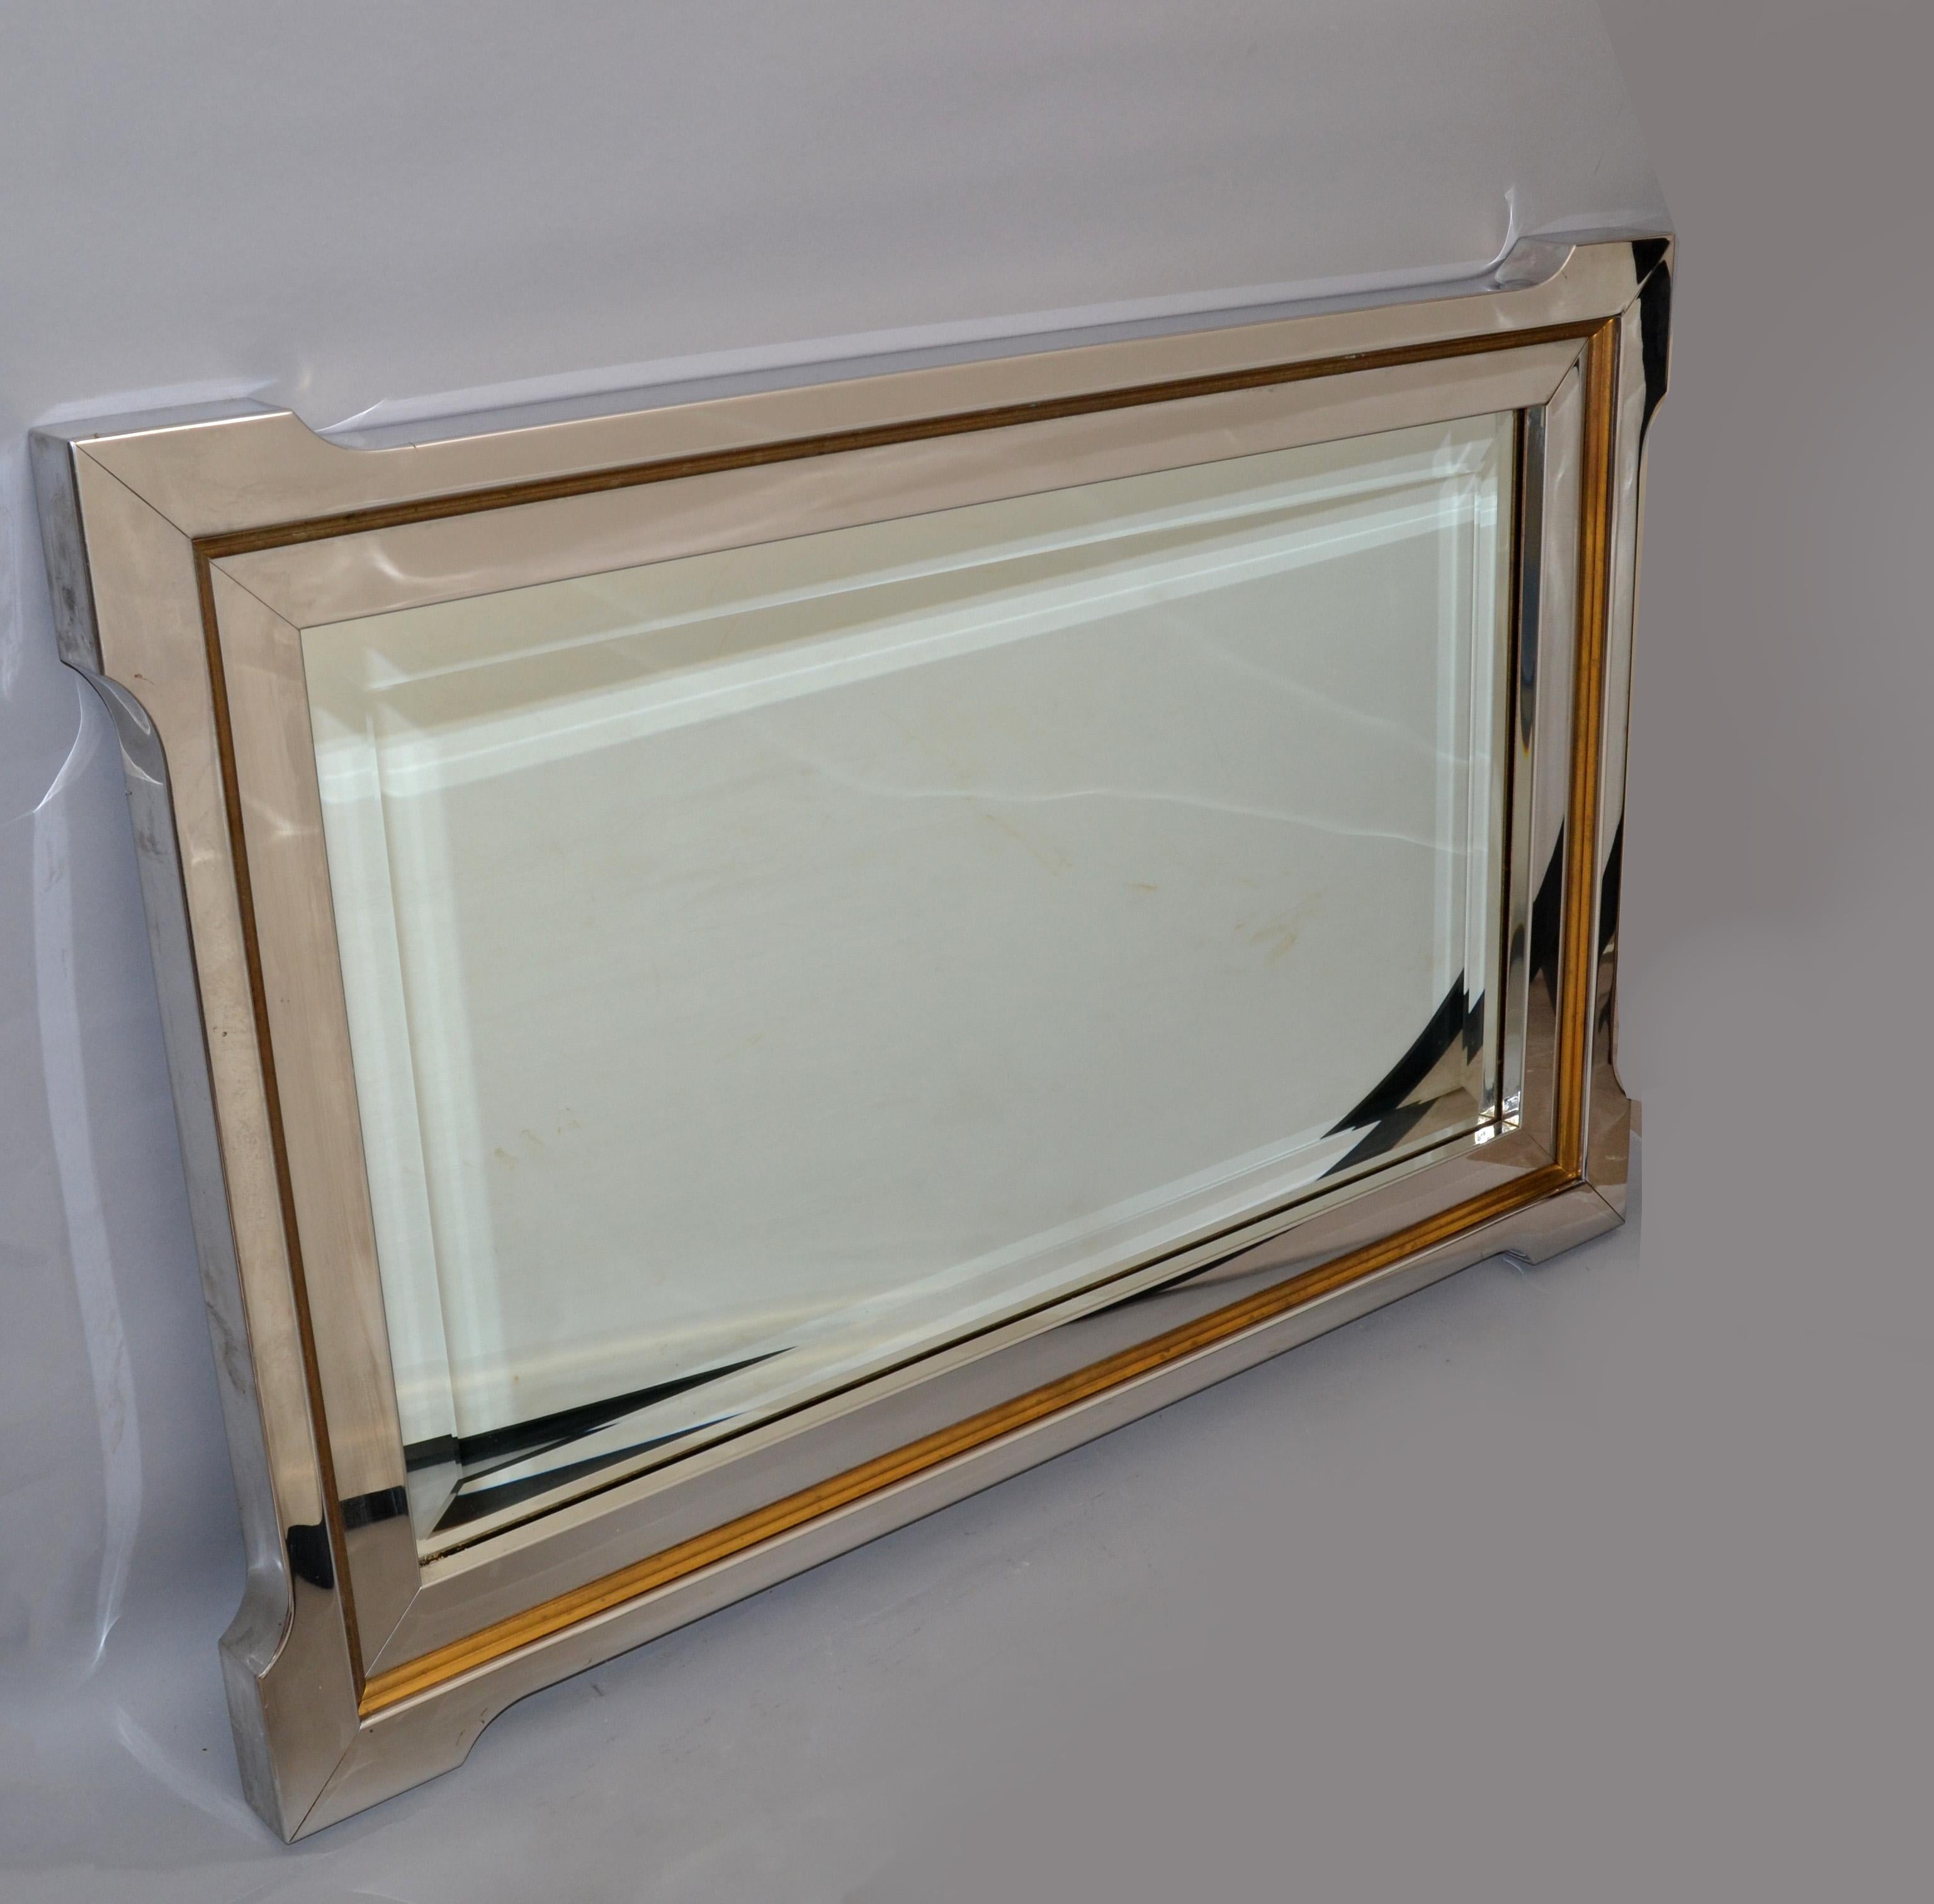 Pierre Cardin Style Mid-Century Modern Chrome and Brass rectangle beveled Wall Mirror with Wood Backwall. 
Picture Size: 21 x 36 inches.
Can be placed horizontally as well as vertically.